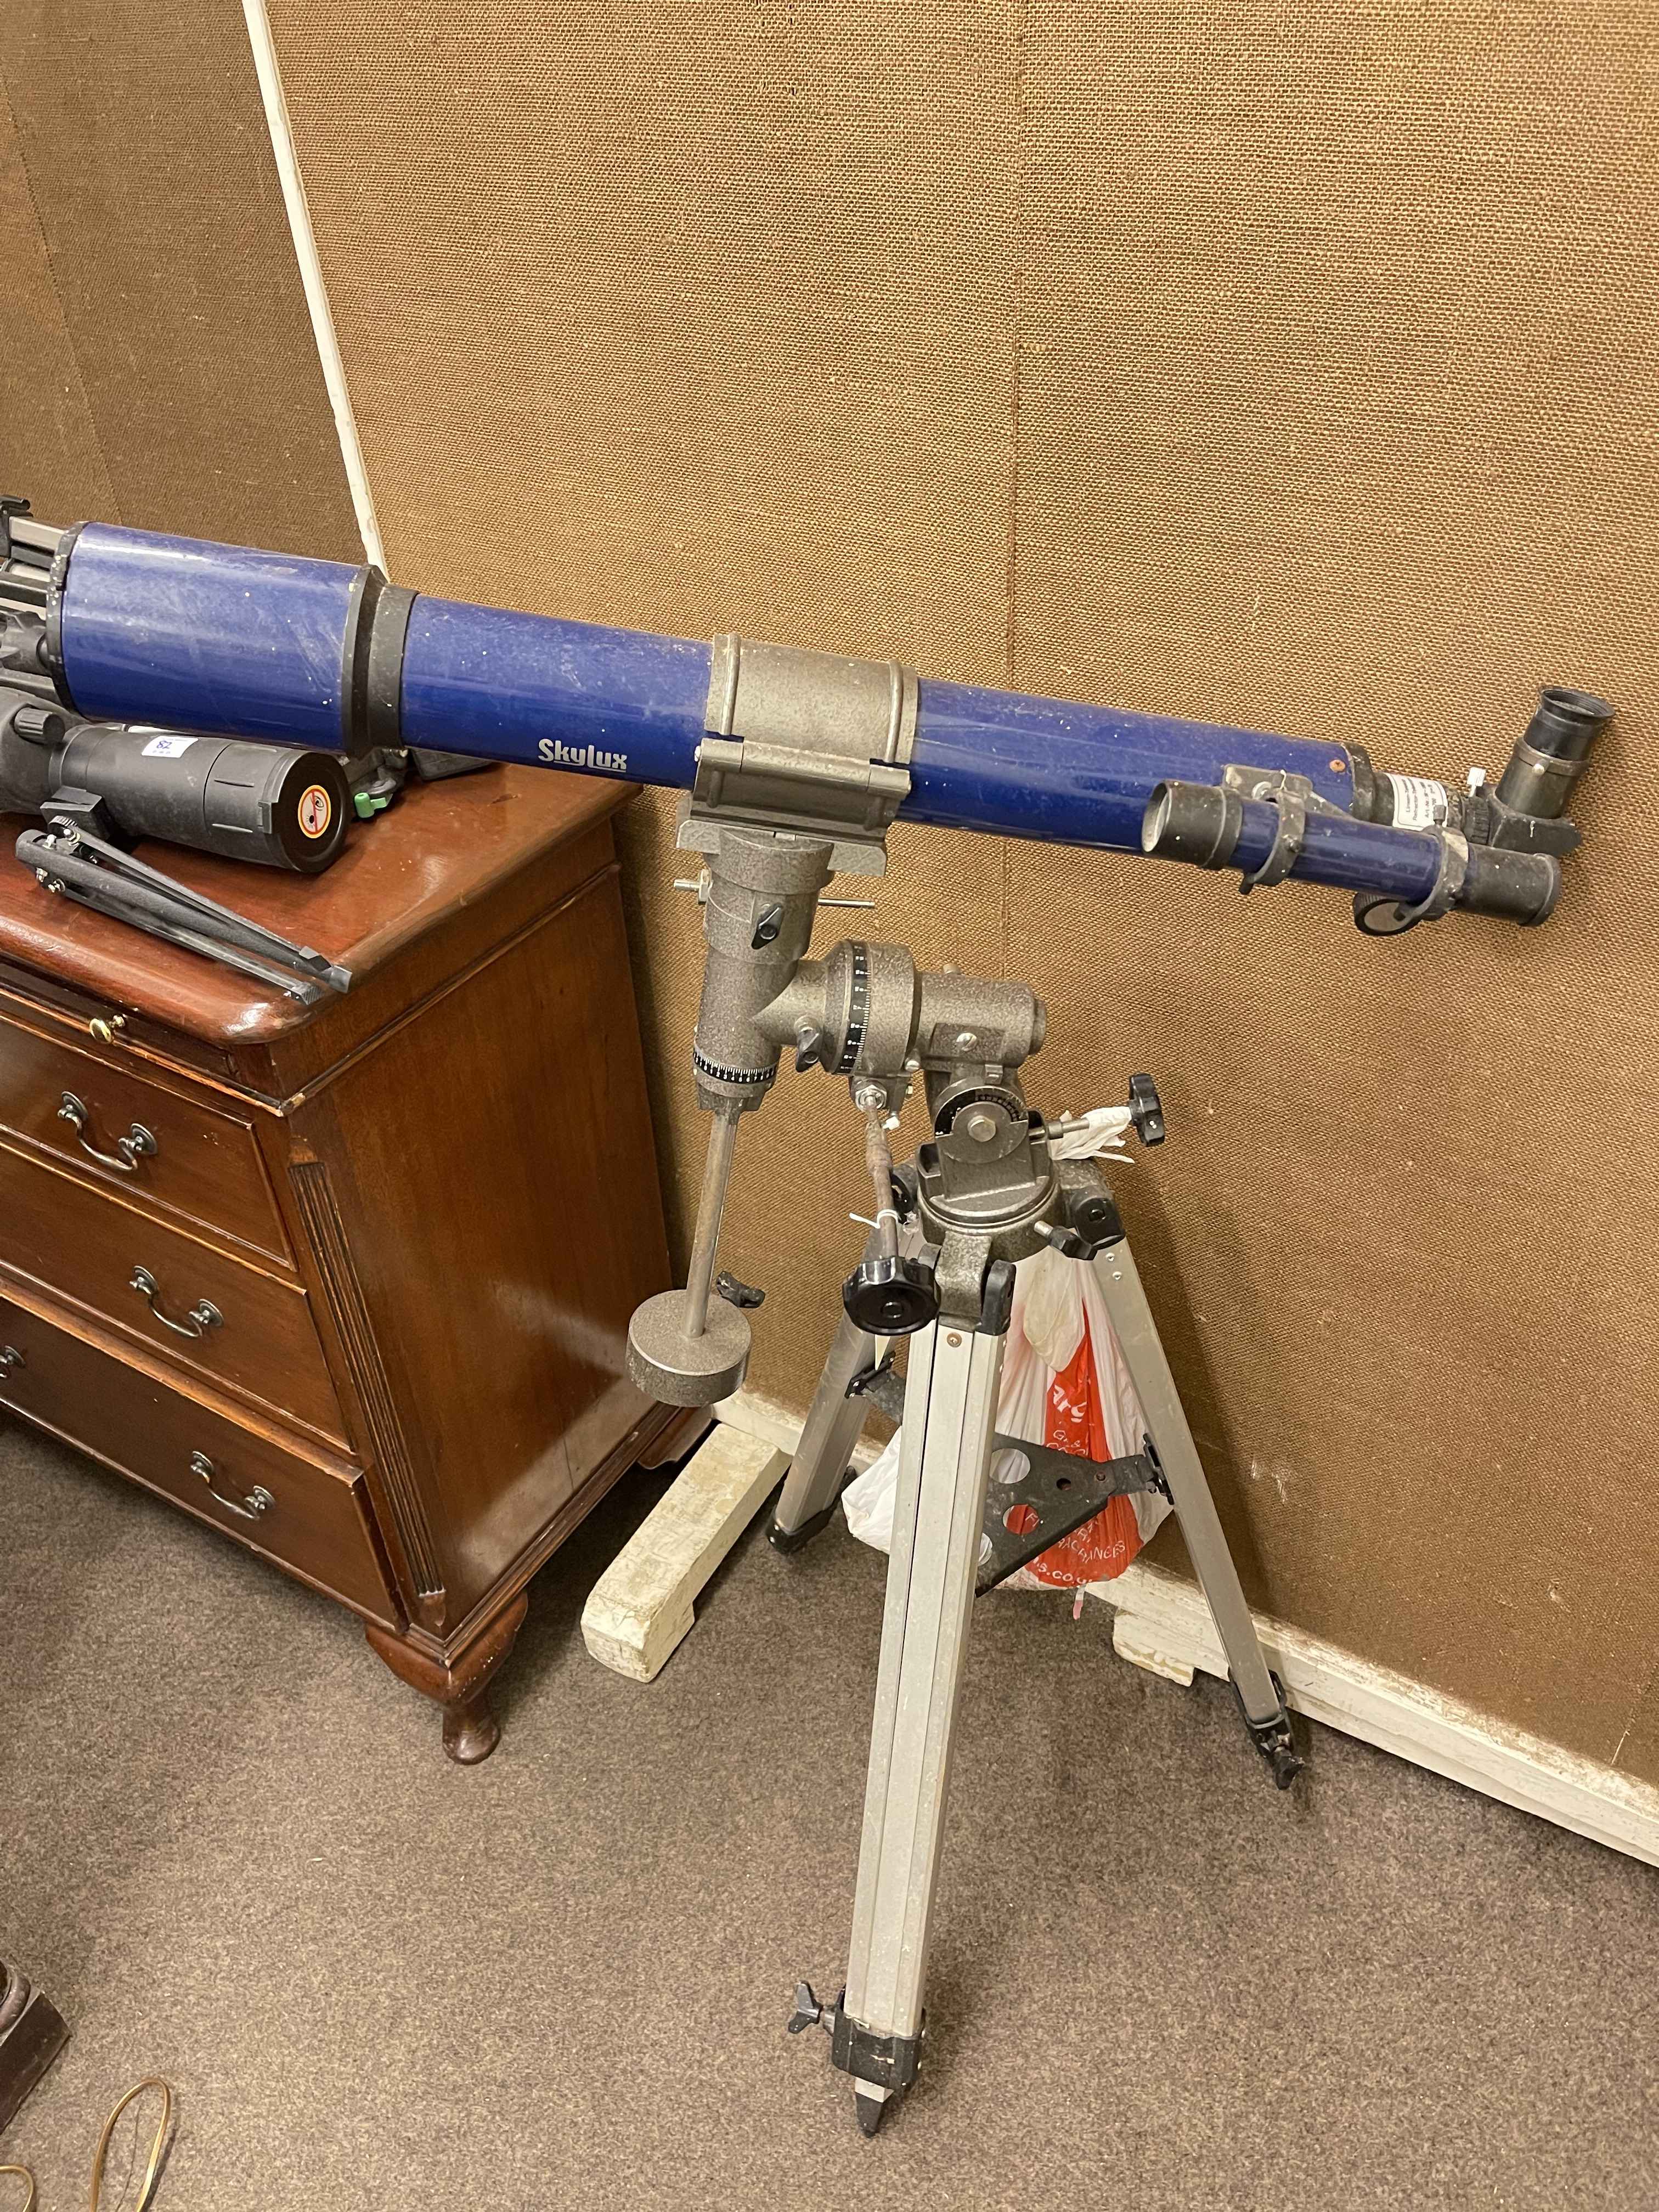 Skylux telescope and tripod, Optus 20x60x60 monoscope with tripod and two further tripods.